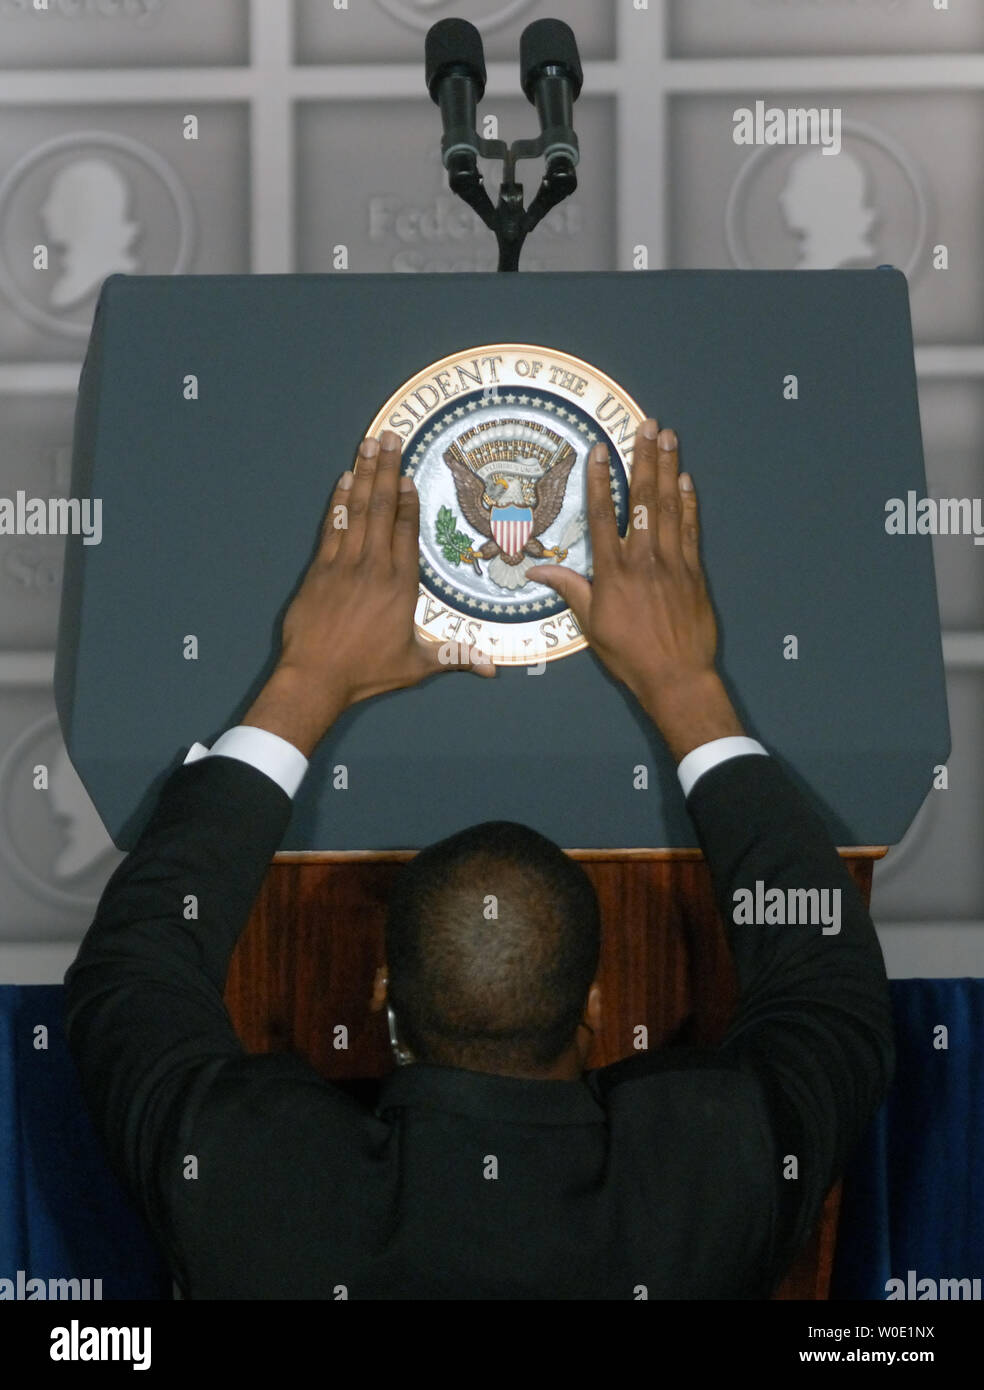 A secret service officer adjusts the presidential seal on the podium before U.S. President George W. Bush speaks at the Federalist Society Gala at Union Station in Washington on November 15, 2007. (UPI Photo/Alexis C. Glenn) Stock Photo